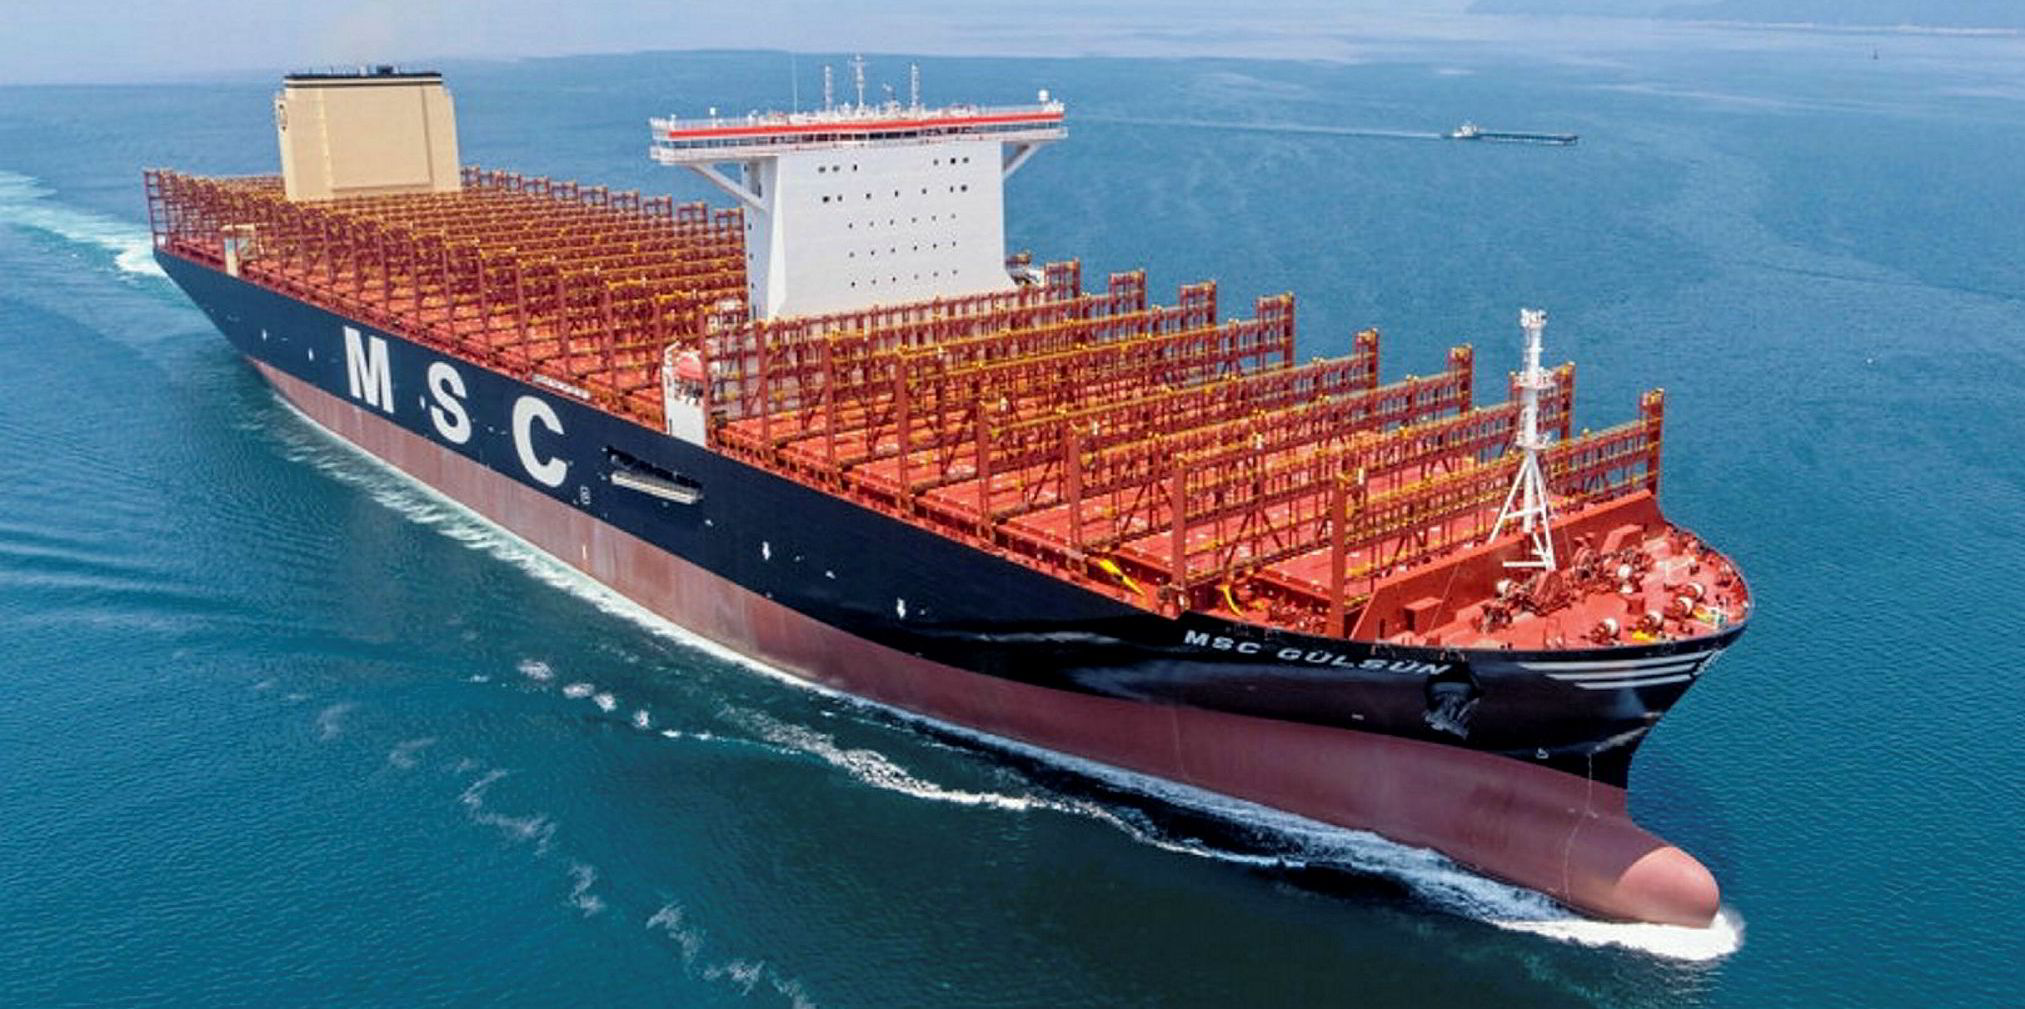 World biggest ship by capacity (23,756 TEU) 400m long and 61 wide. 